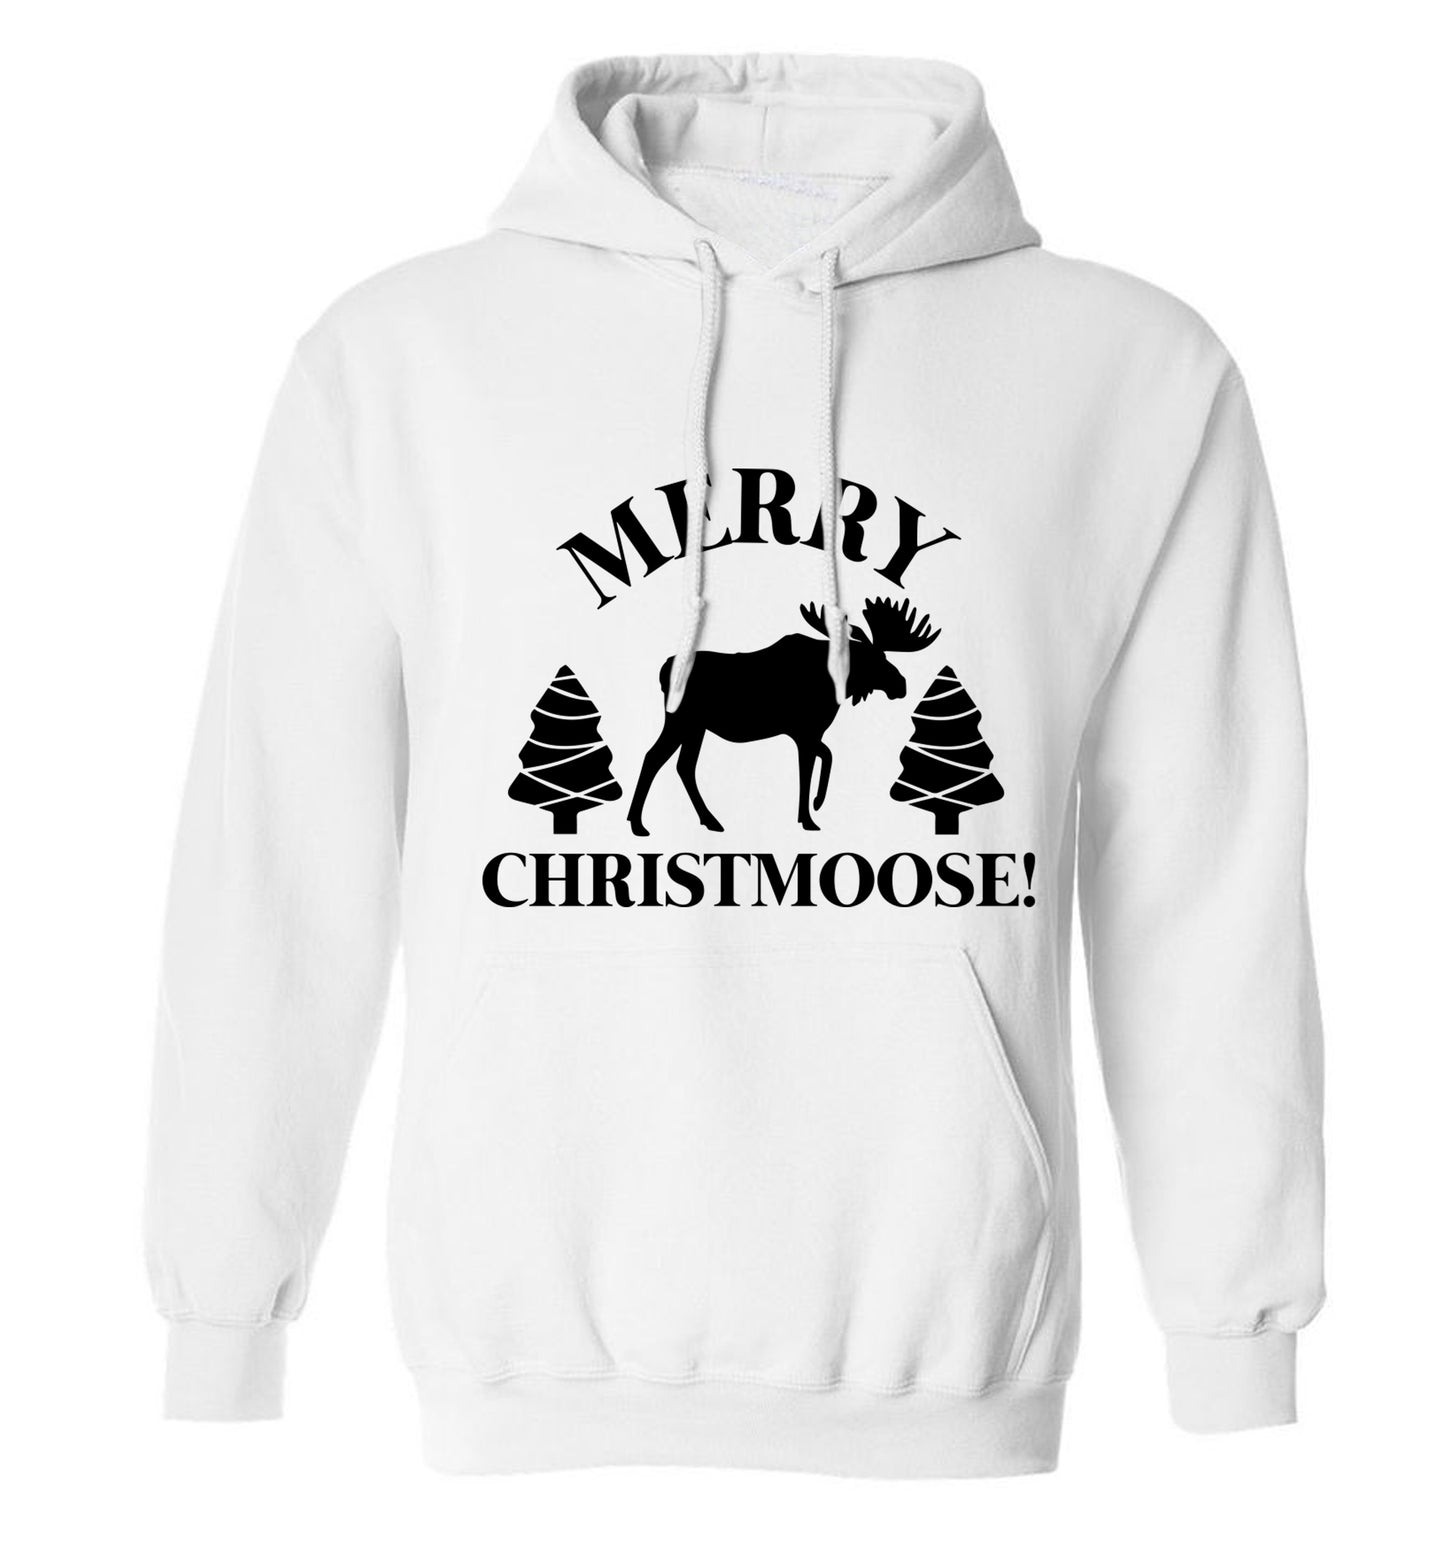 Merry Christmoose adults unisex white hoodie 2XL